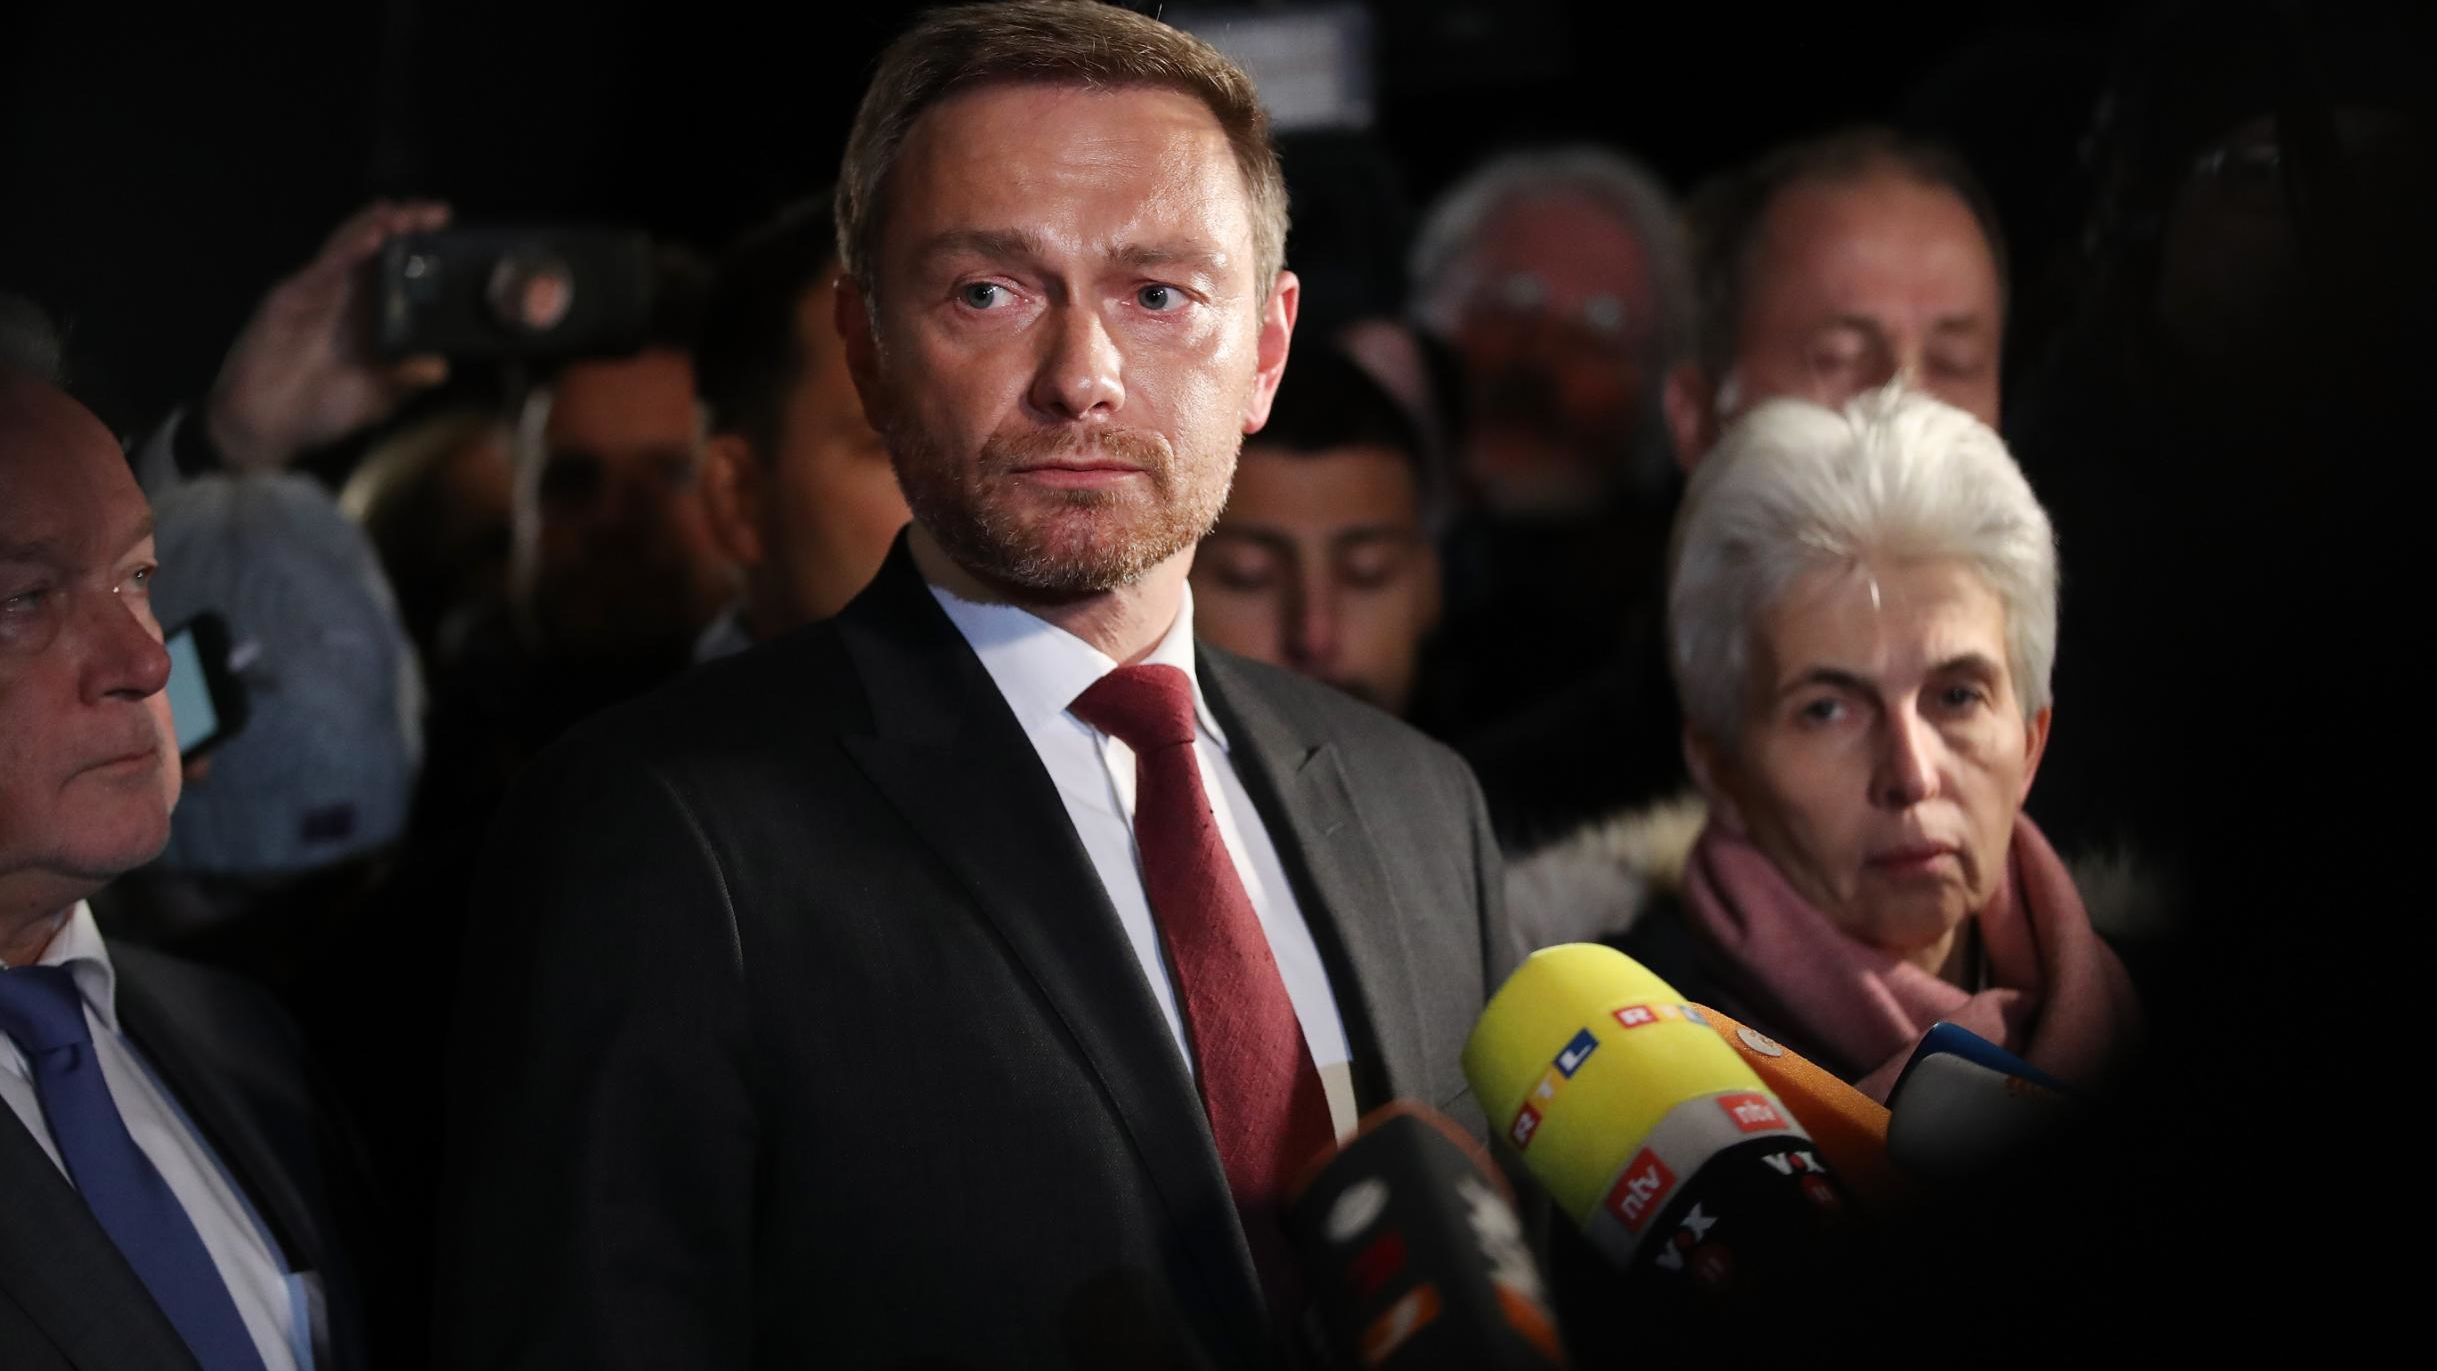 Christian Lindner, leader of the Free Democrats (FDP) announced his party's withdrawal from coalition talks late Sunday.